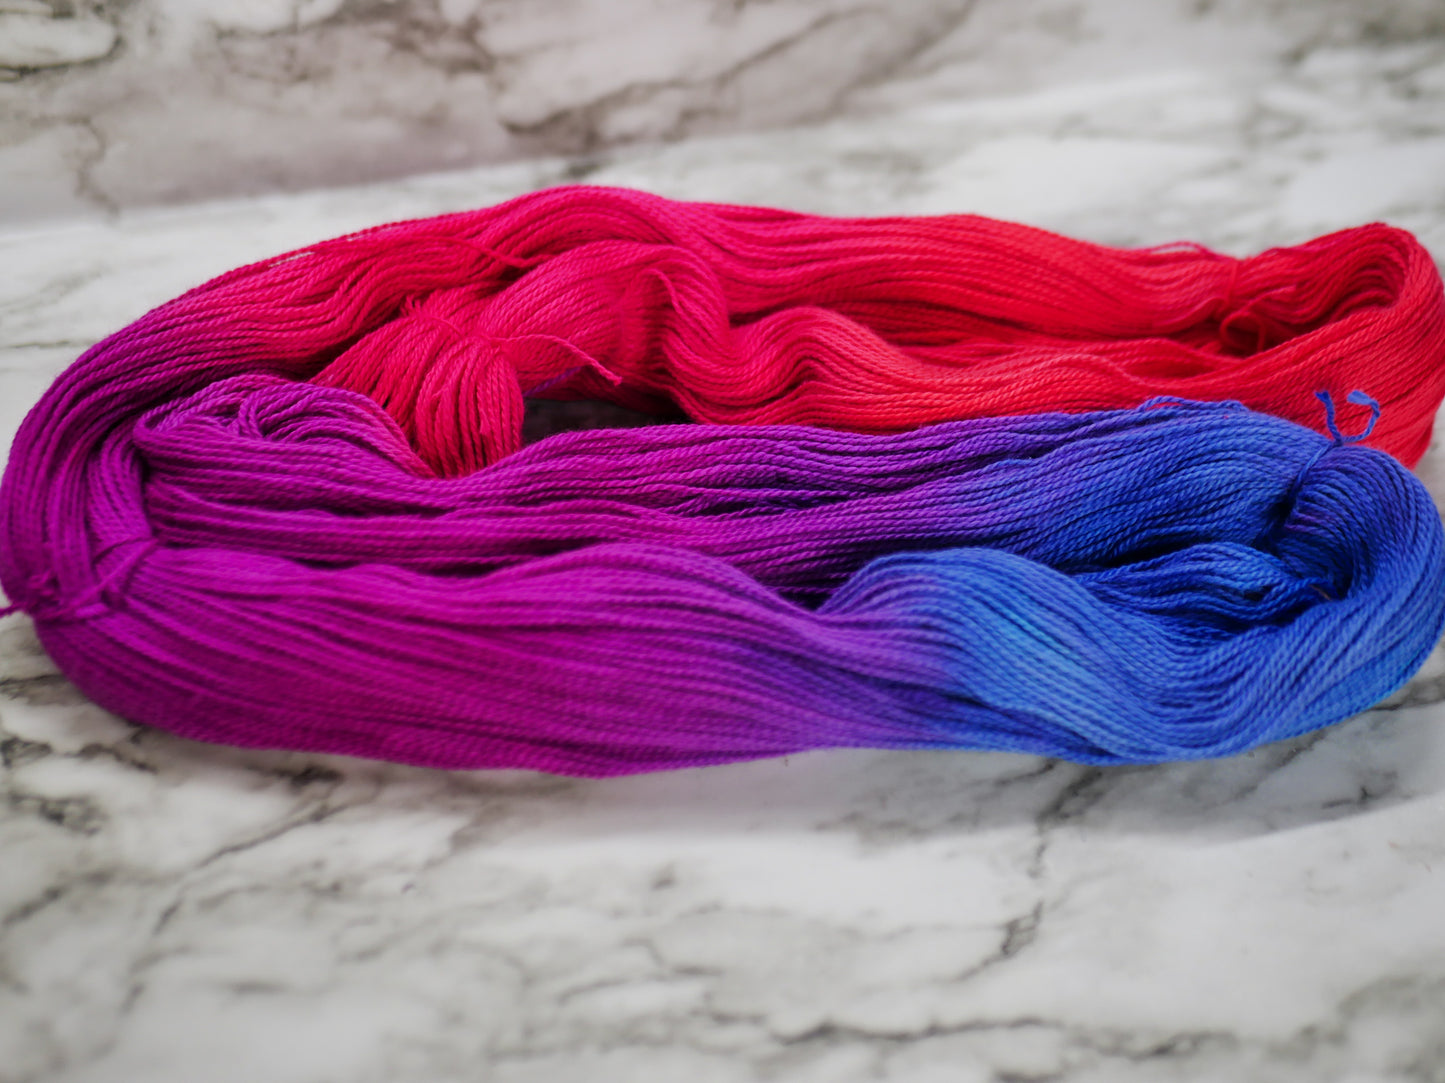 100g Skein - Handpainted Georgia Cotton - Dyed for pooling